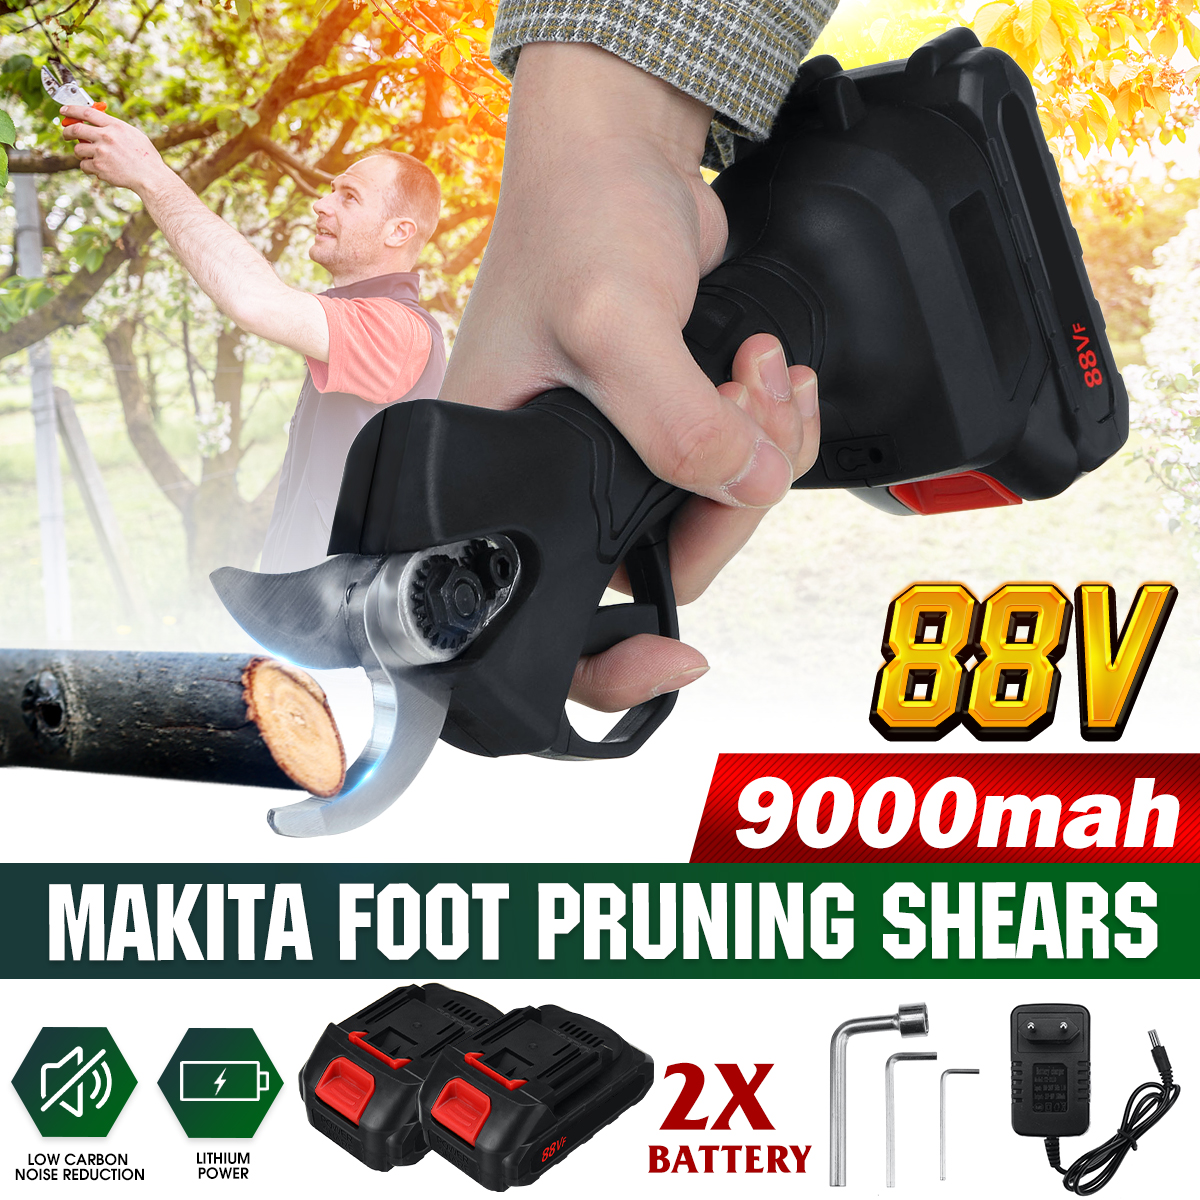 21V-Cordless-Pruning-Shears-Electric-Scissors-Rechargeable-Wood-Cutter-W-12pcs-Battery-1802318-2